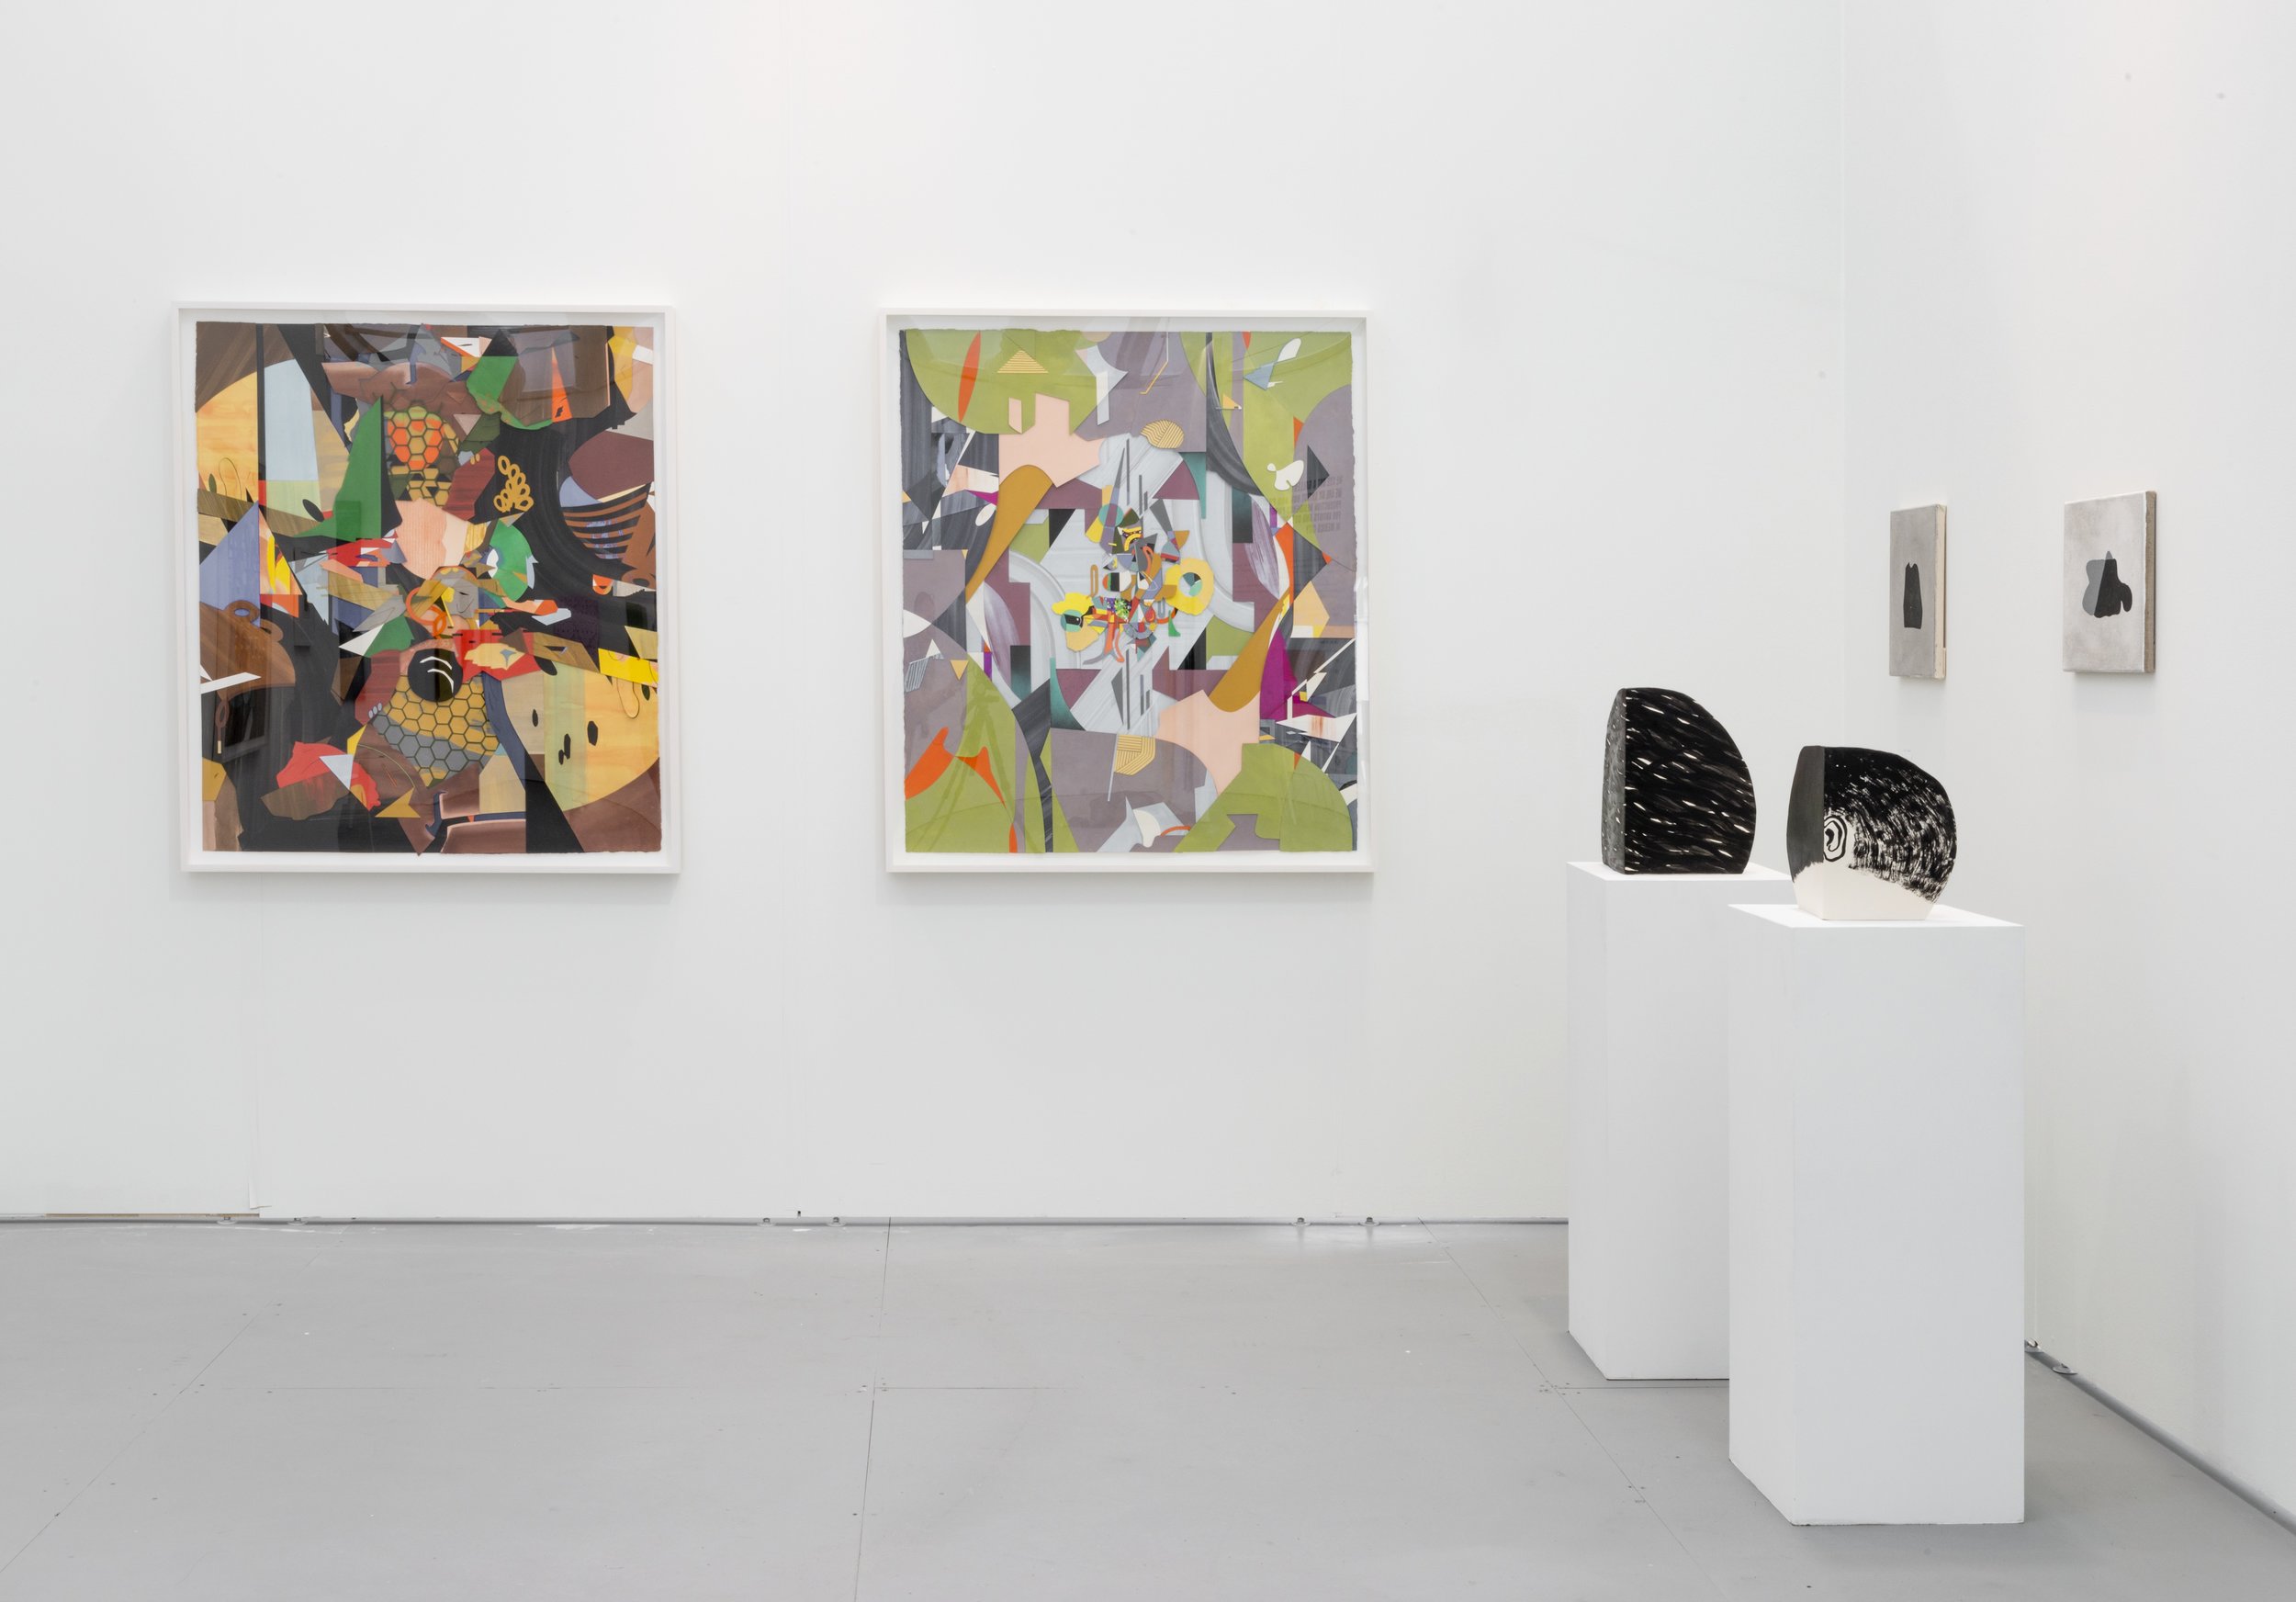  Installation view, “UNTITLED Art Fair” (with Amy Pleasant), presented by Jeff Bailey Gallery, Miami, 2015 